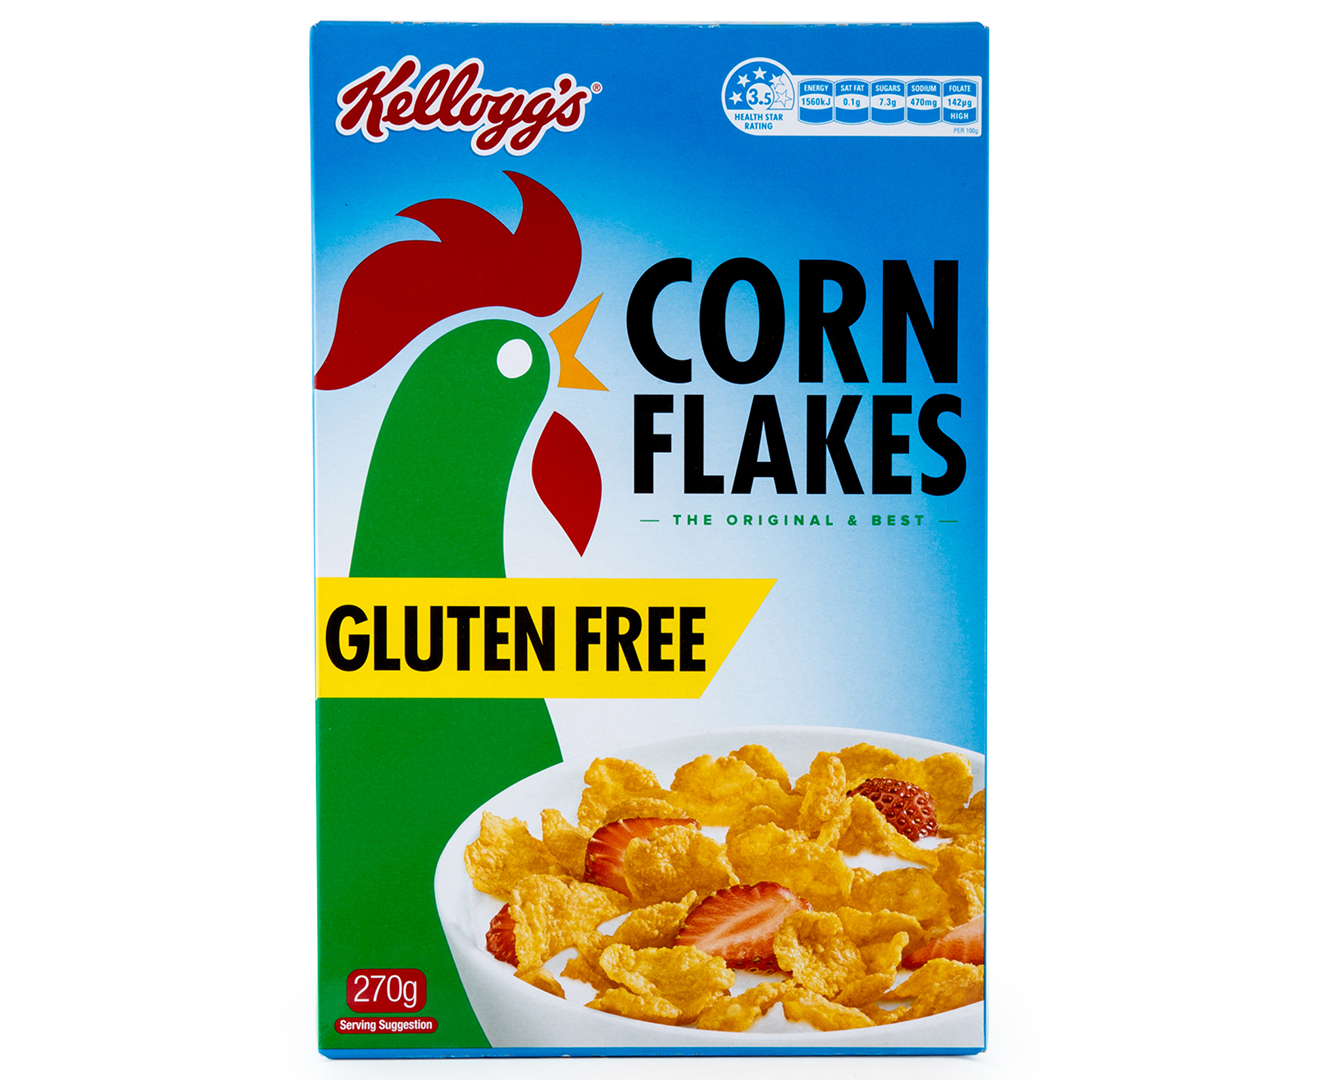 frosted corn flakes gluten free